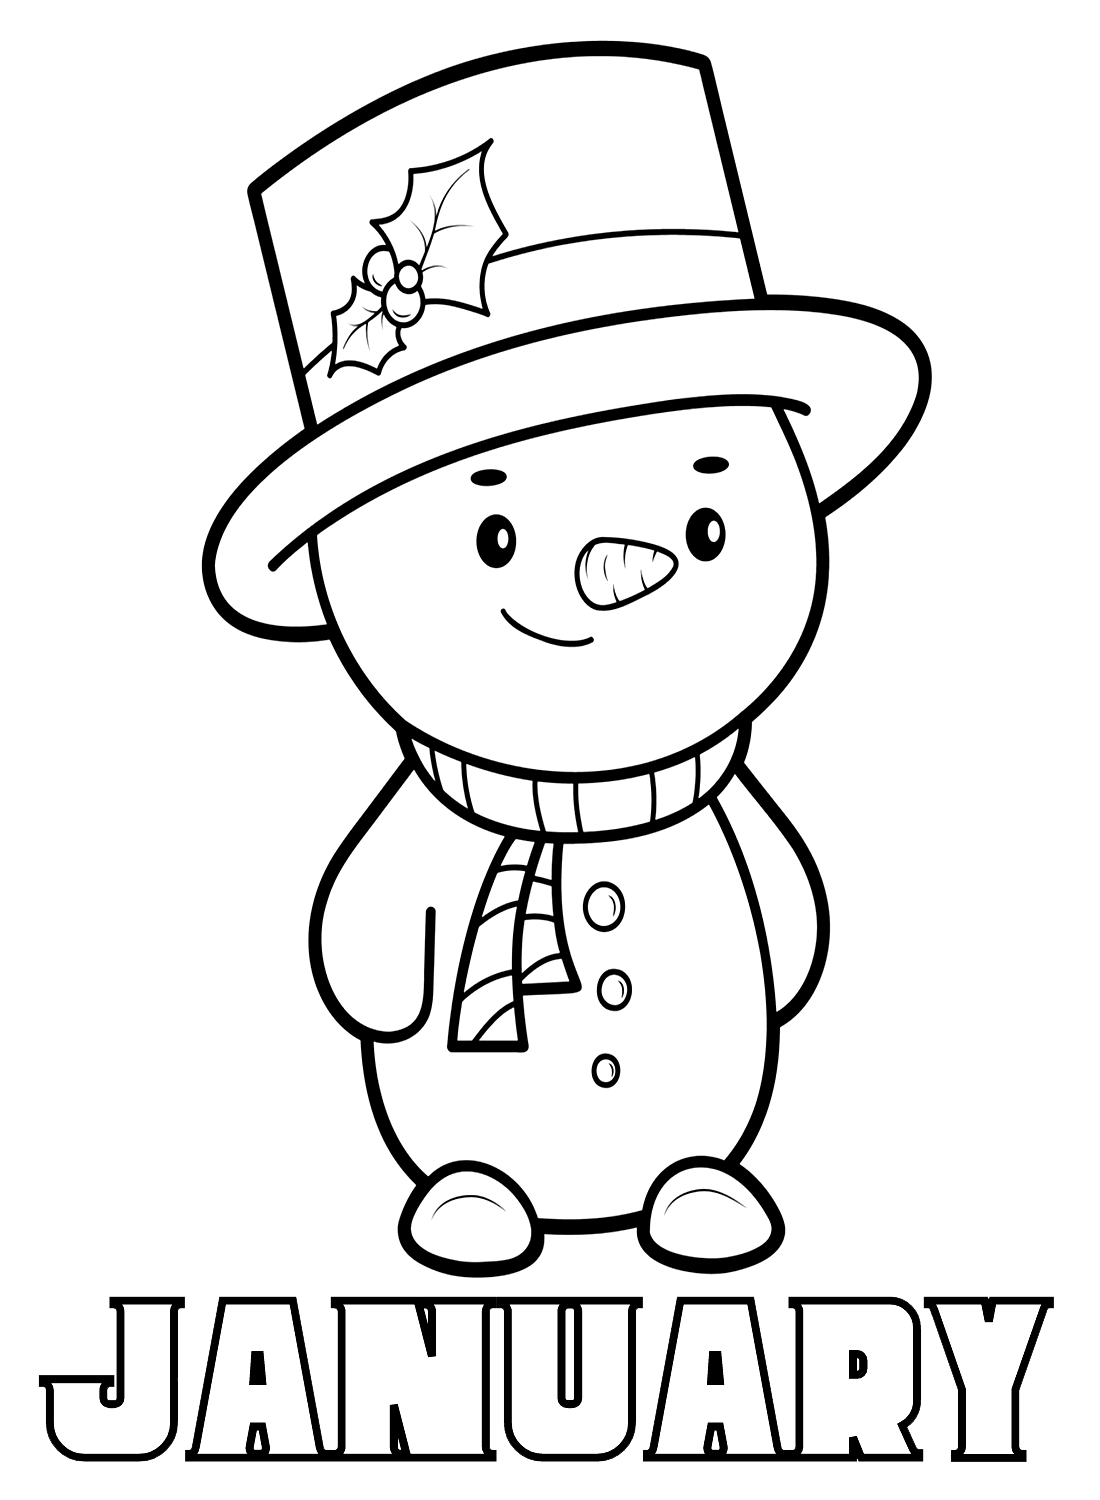 January with Snowman Coloring Page - Free Printable Coloring Pages